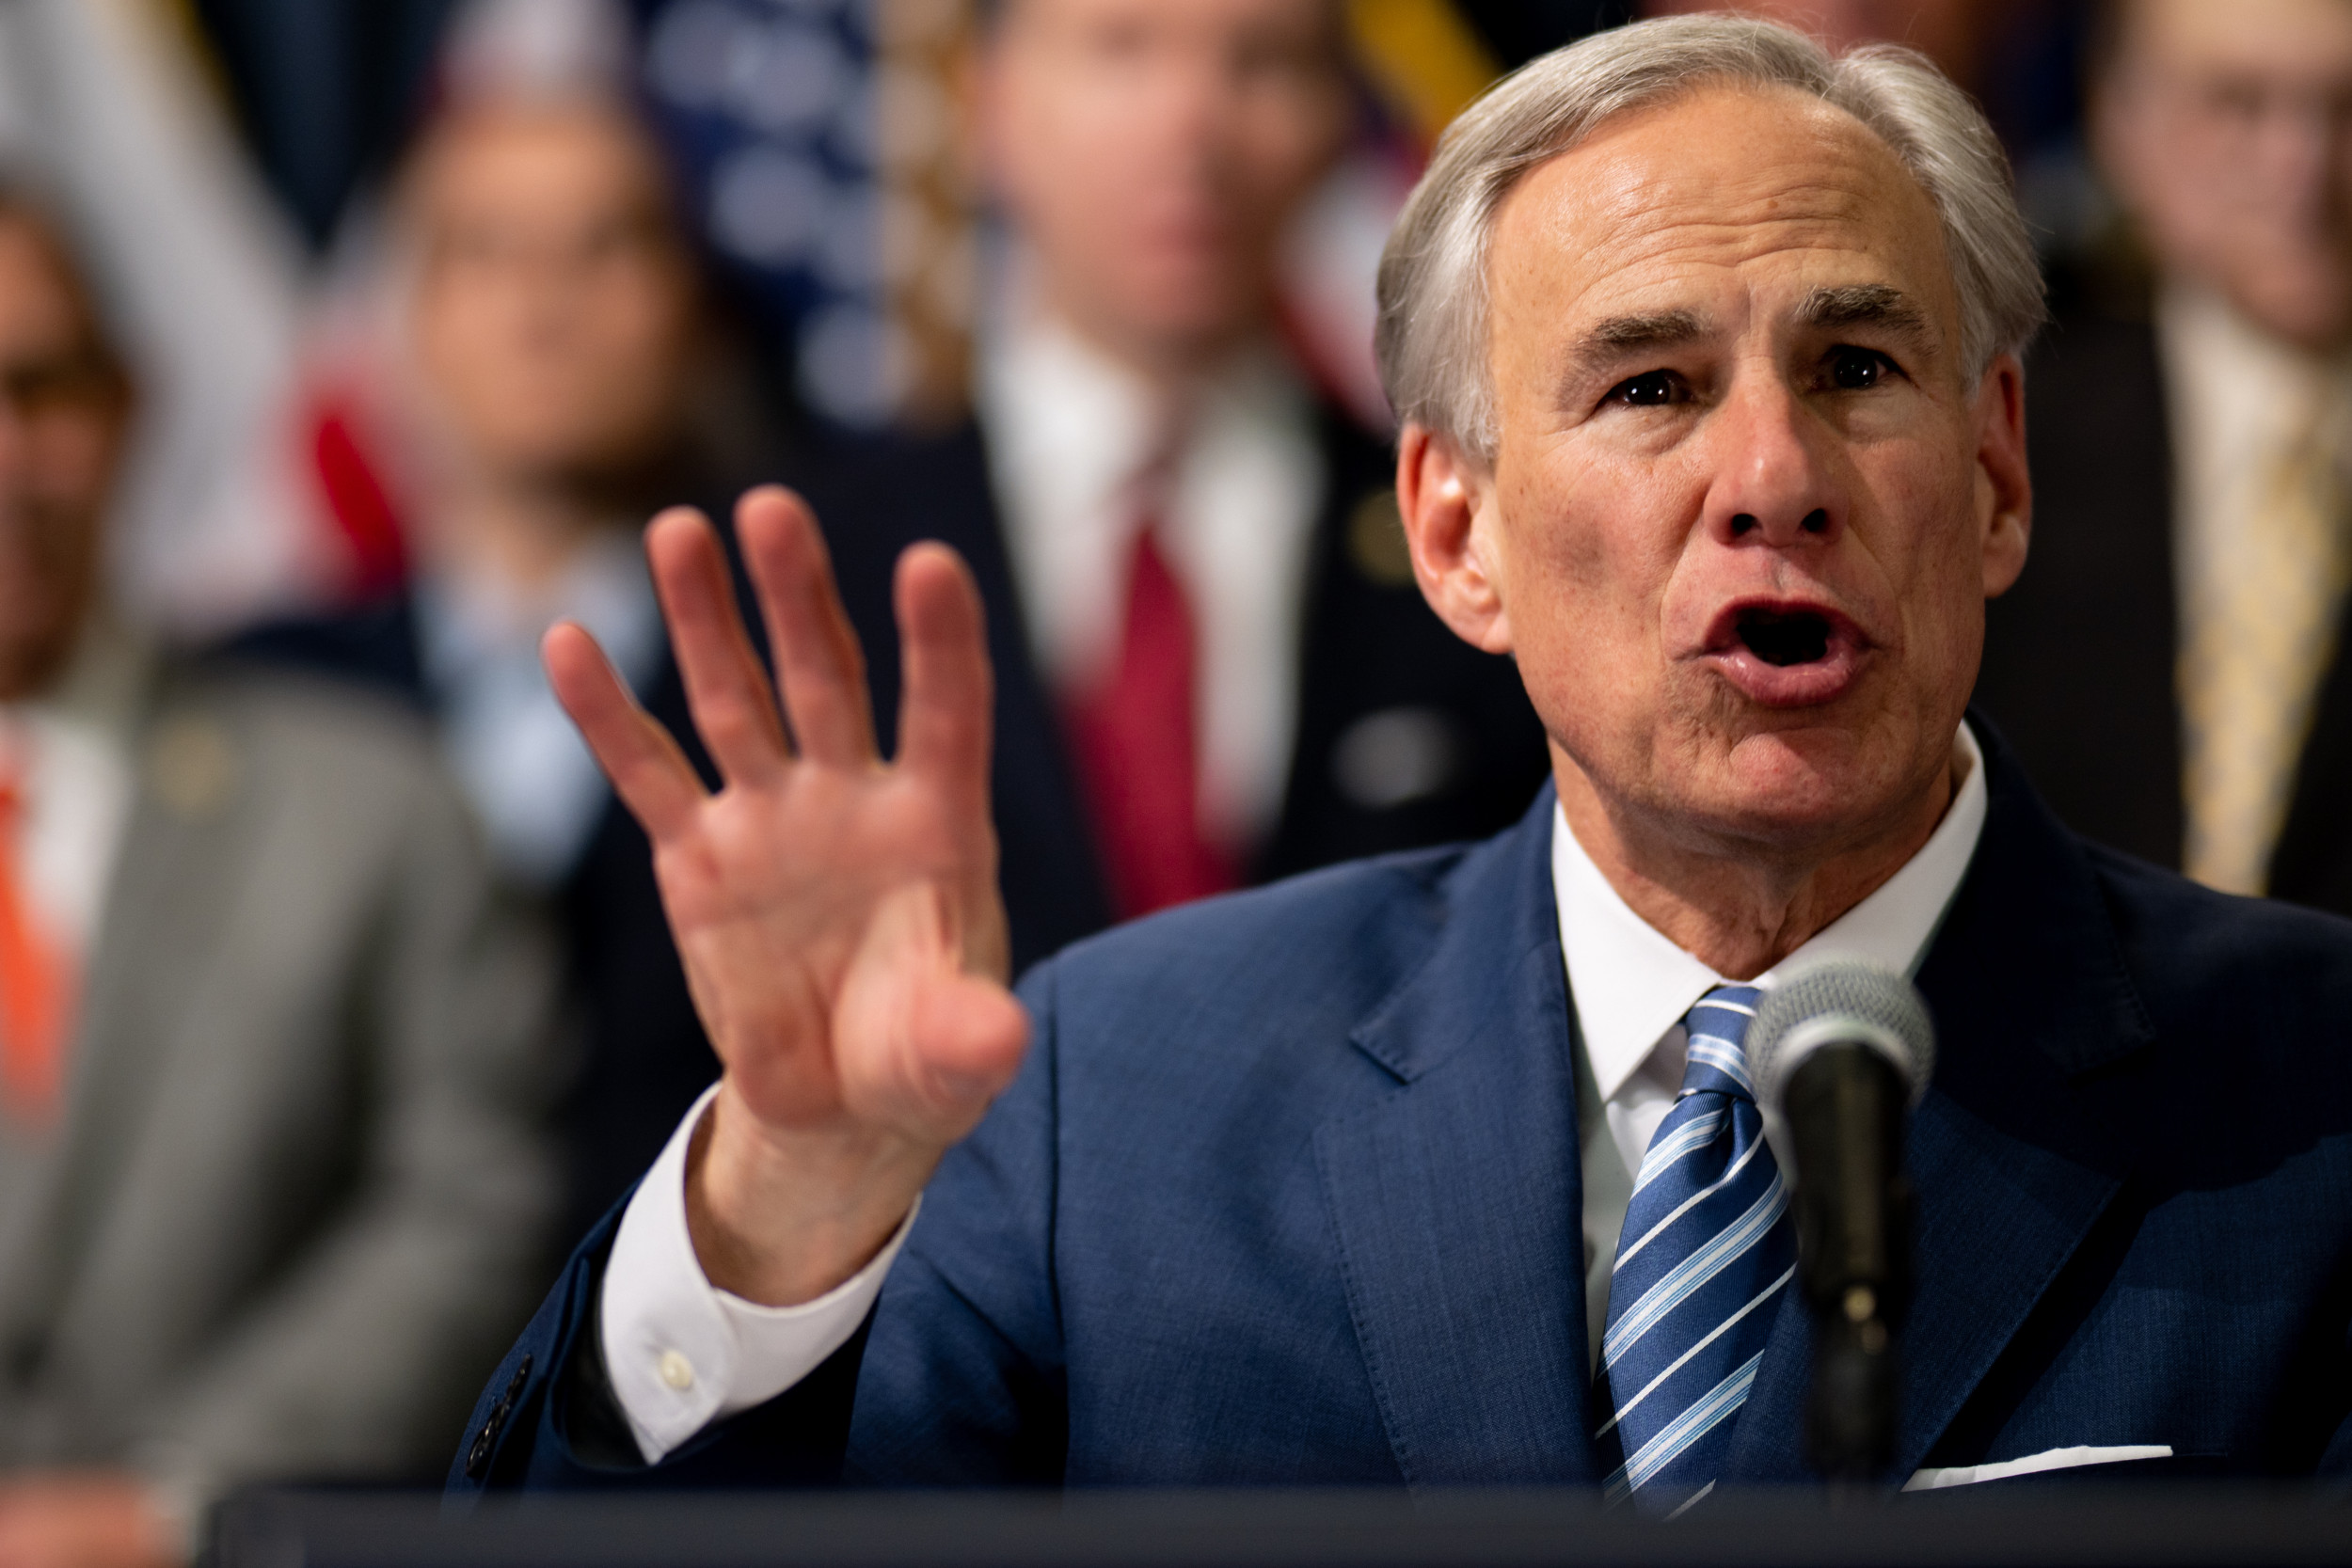 How Greg Abbott Compelled Democrats to Change